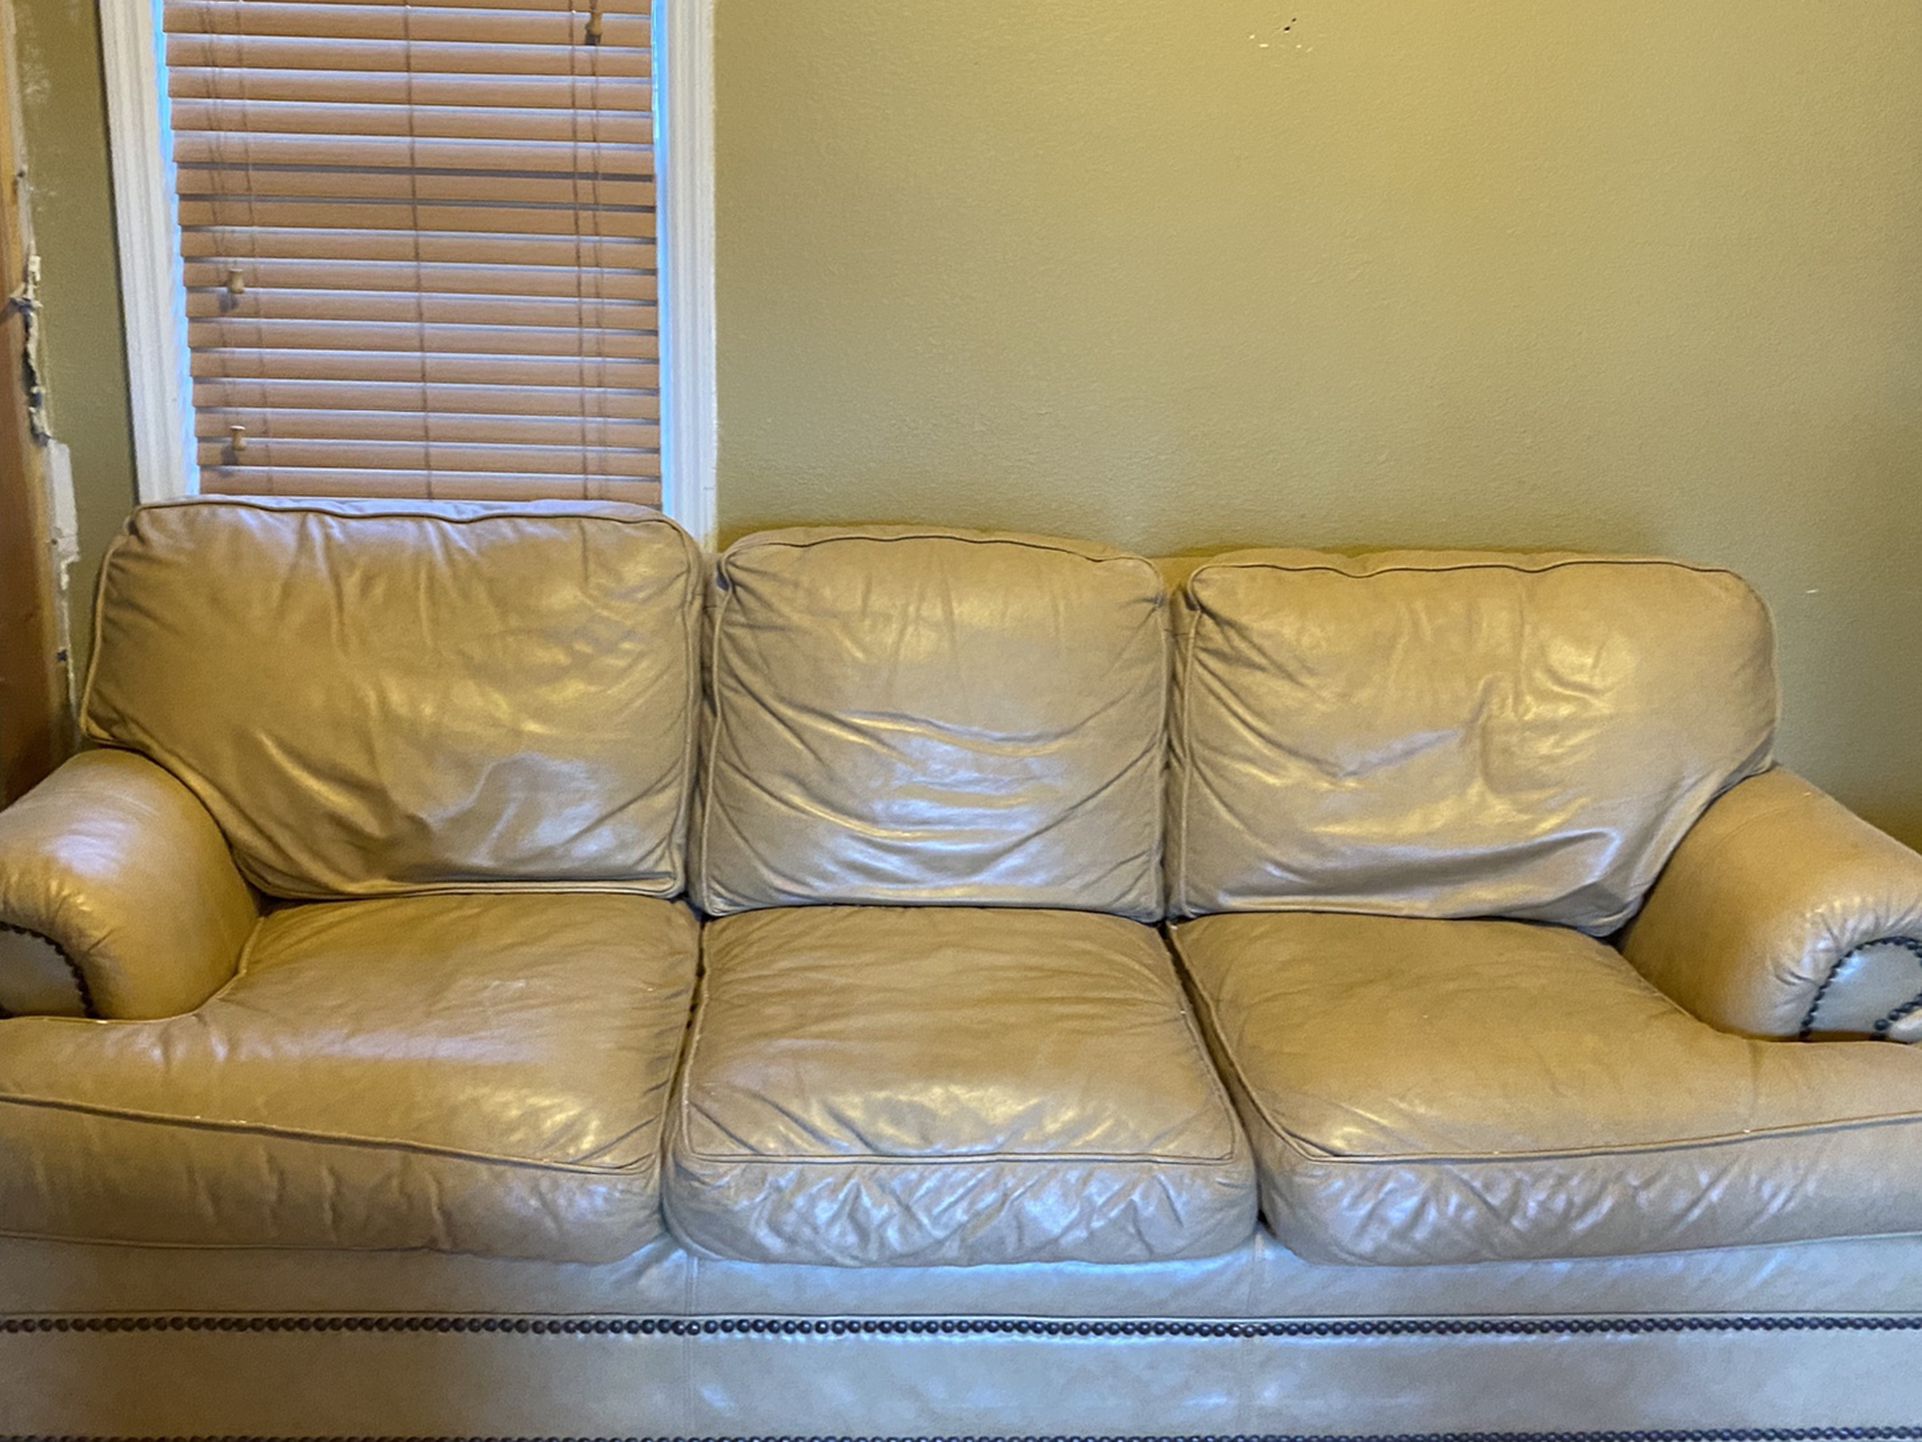 Free Leather Couch